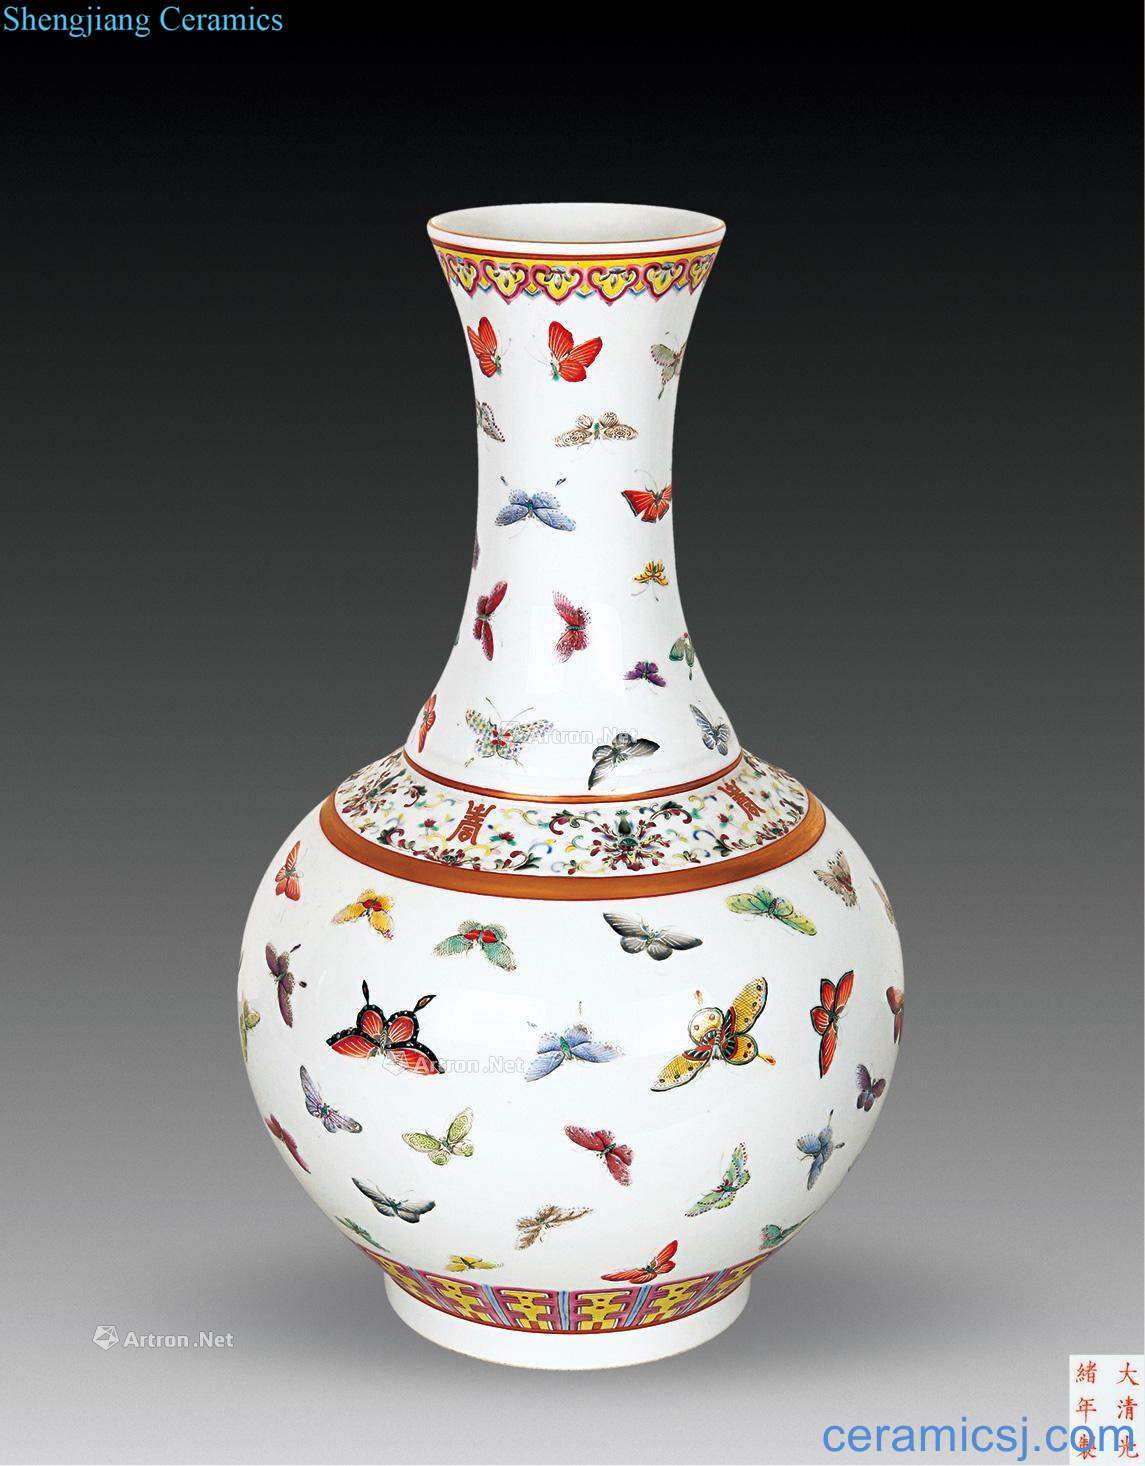 Pastel reign of qing emperor guangxu the butterfly bottle (a)